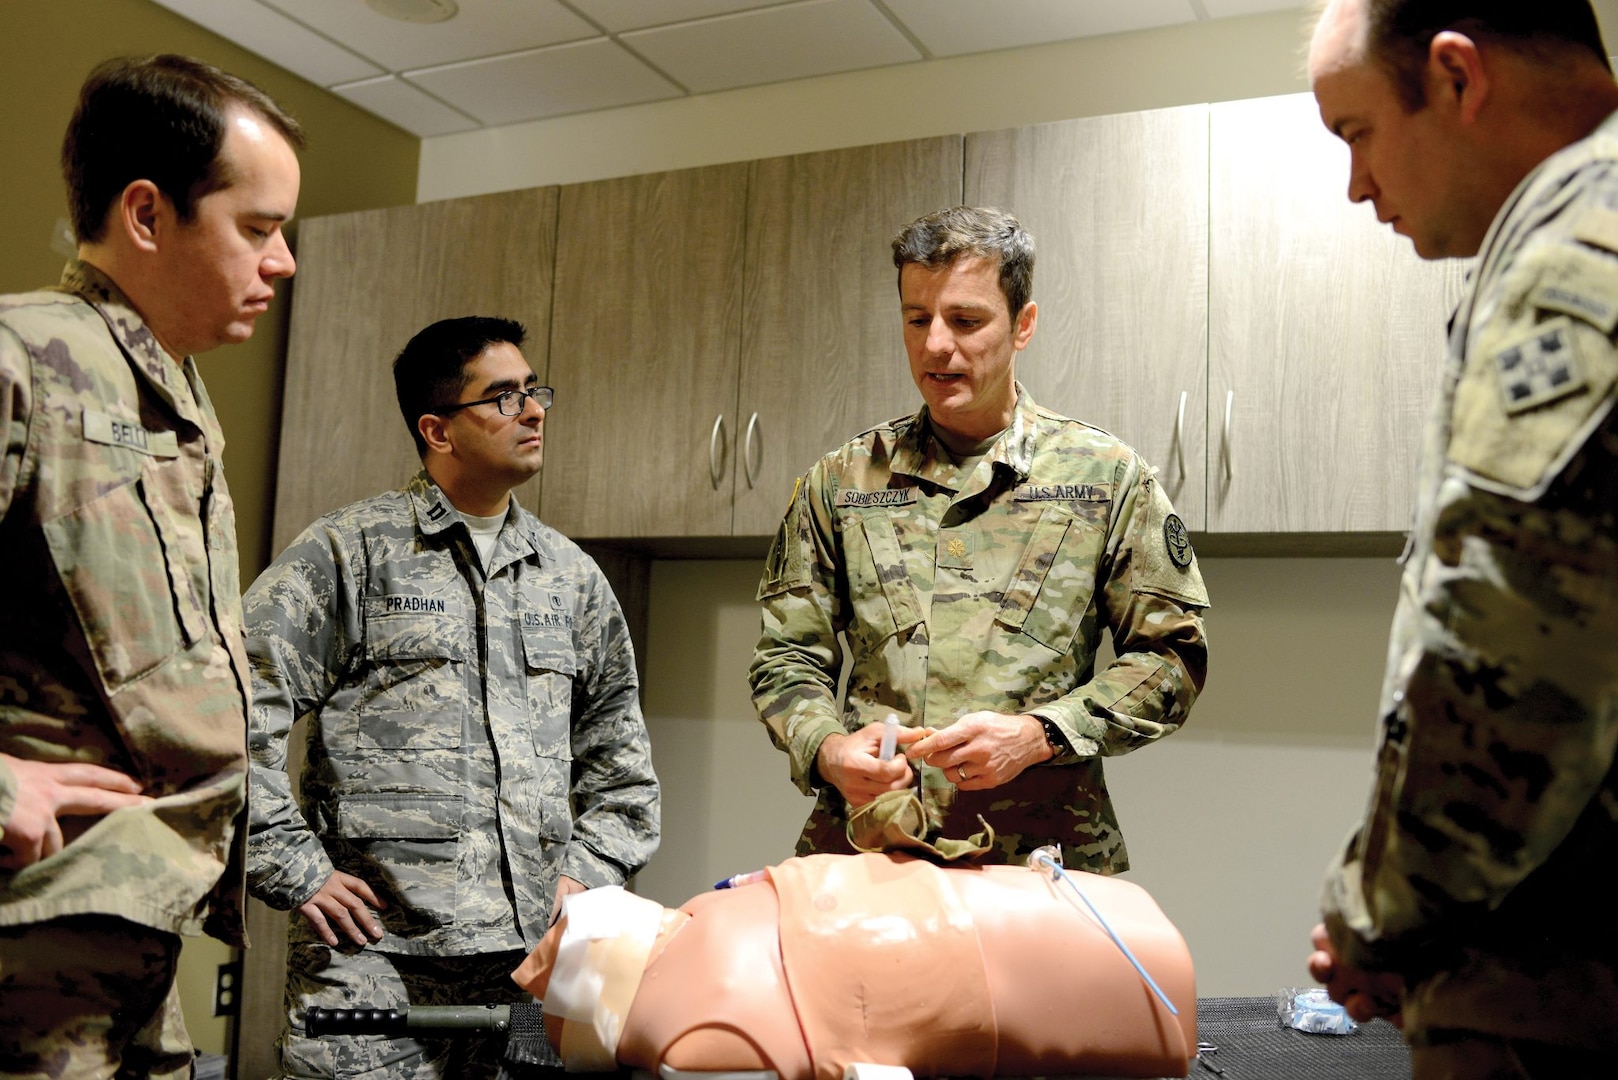 Army Maj. Michal Sobieszczyk demonstrates how to perform a cricothyrotomy Jan. 14 for doctors with 4th Infantry Division and the U.S. Air Force Academy at Evans Army Community Hospital’s new medical simulation lab. Sobieszczyk is a pulmonary/critical care doctor who provided joint education with his critical-care mobile training team assigned to Brooke Army Medical Center at Joint Base San Antonio-Fort Sam Houston.